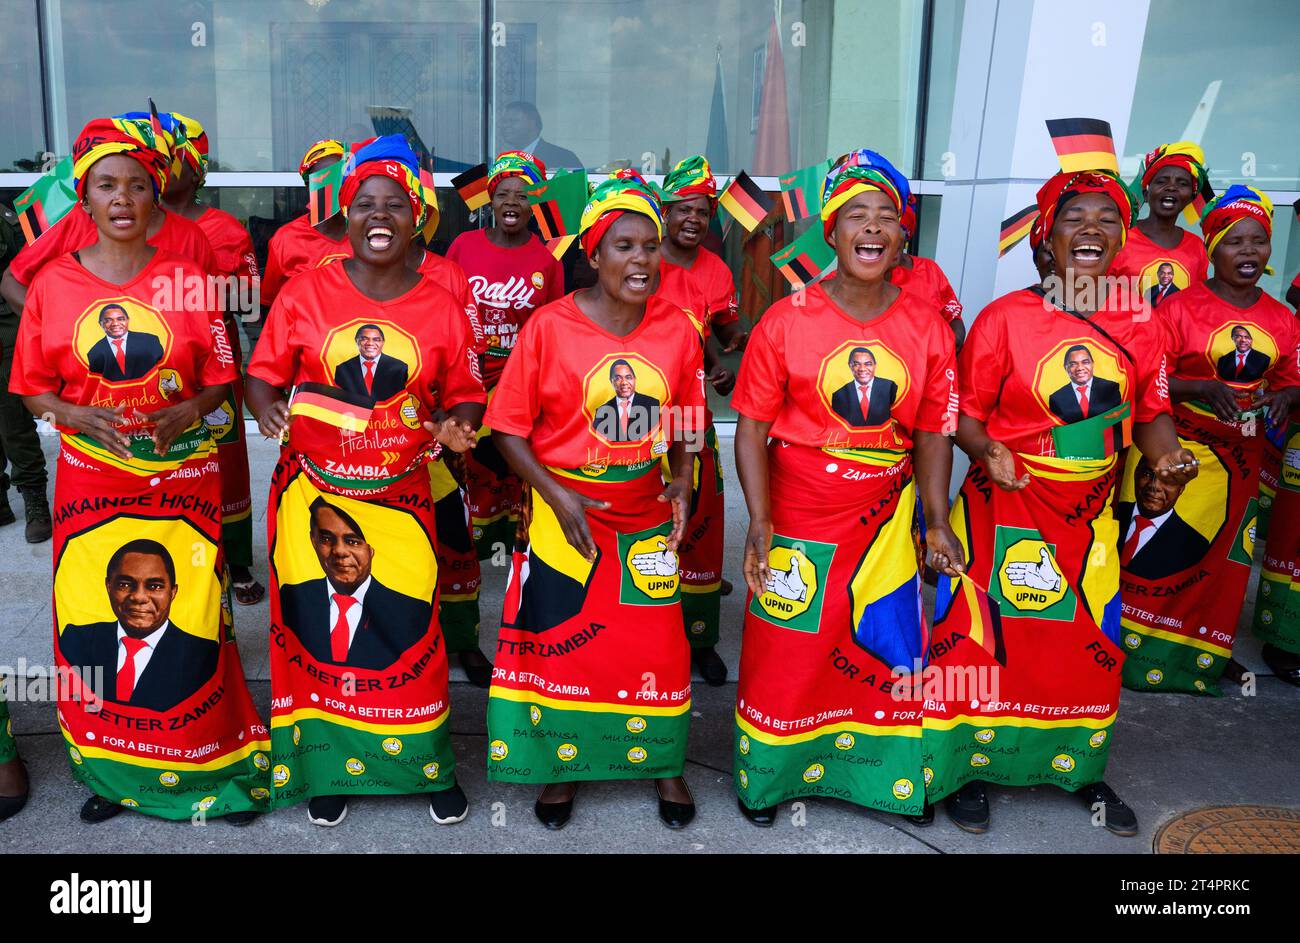 Lusaka, Zambia. 01st Nov, 2023. Women in colorful clothes with the likeness of President Hichilema sing and dance with military honors at Kenneth Kaunda International Airport in Lusaka as they welcome German President Steinmeier. President Steinmeier is visiting the East African countries of Tanzania and Zambia this week. Credit: Bernd von Jutrczenka/dpa/Alamy Live News Stock Photo